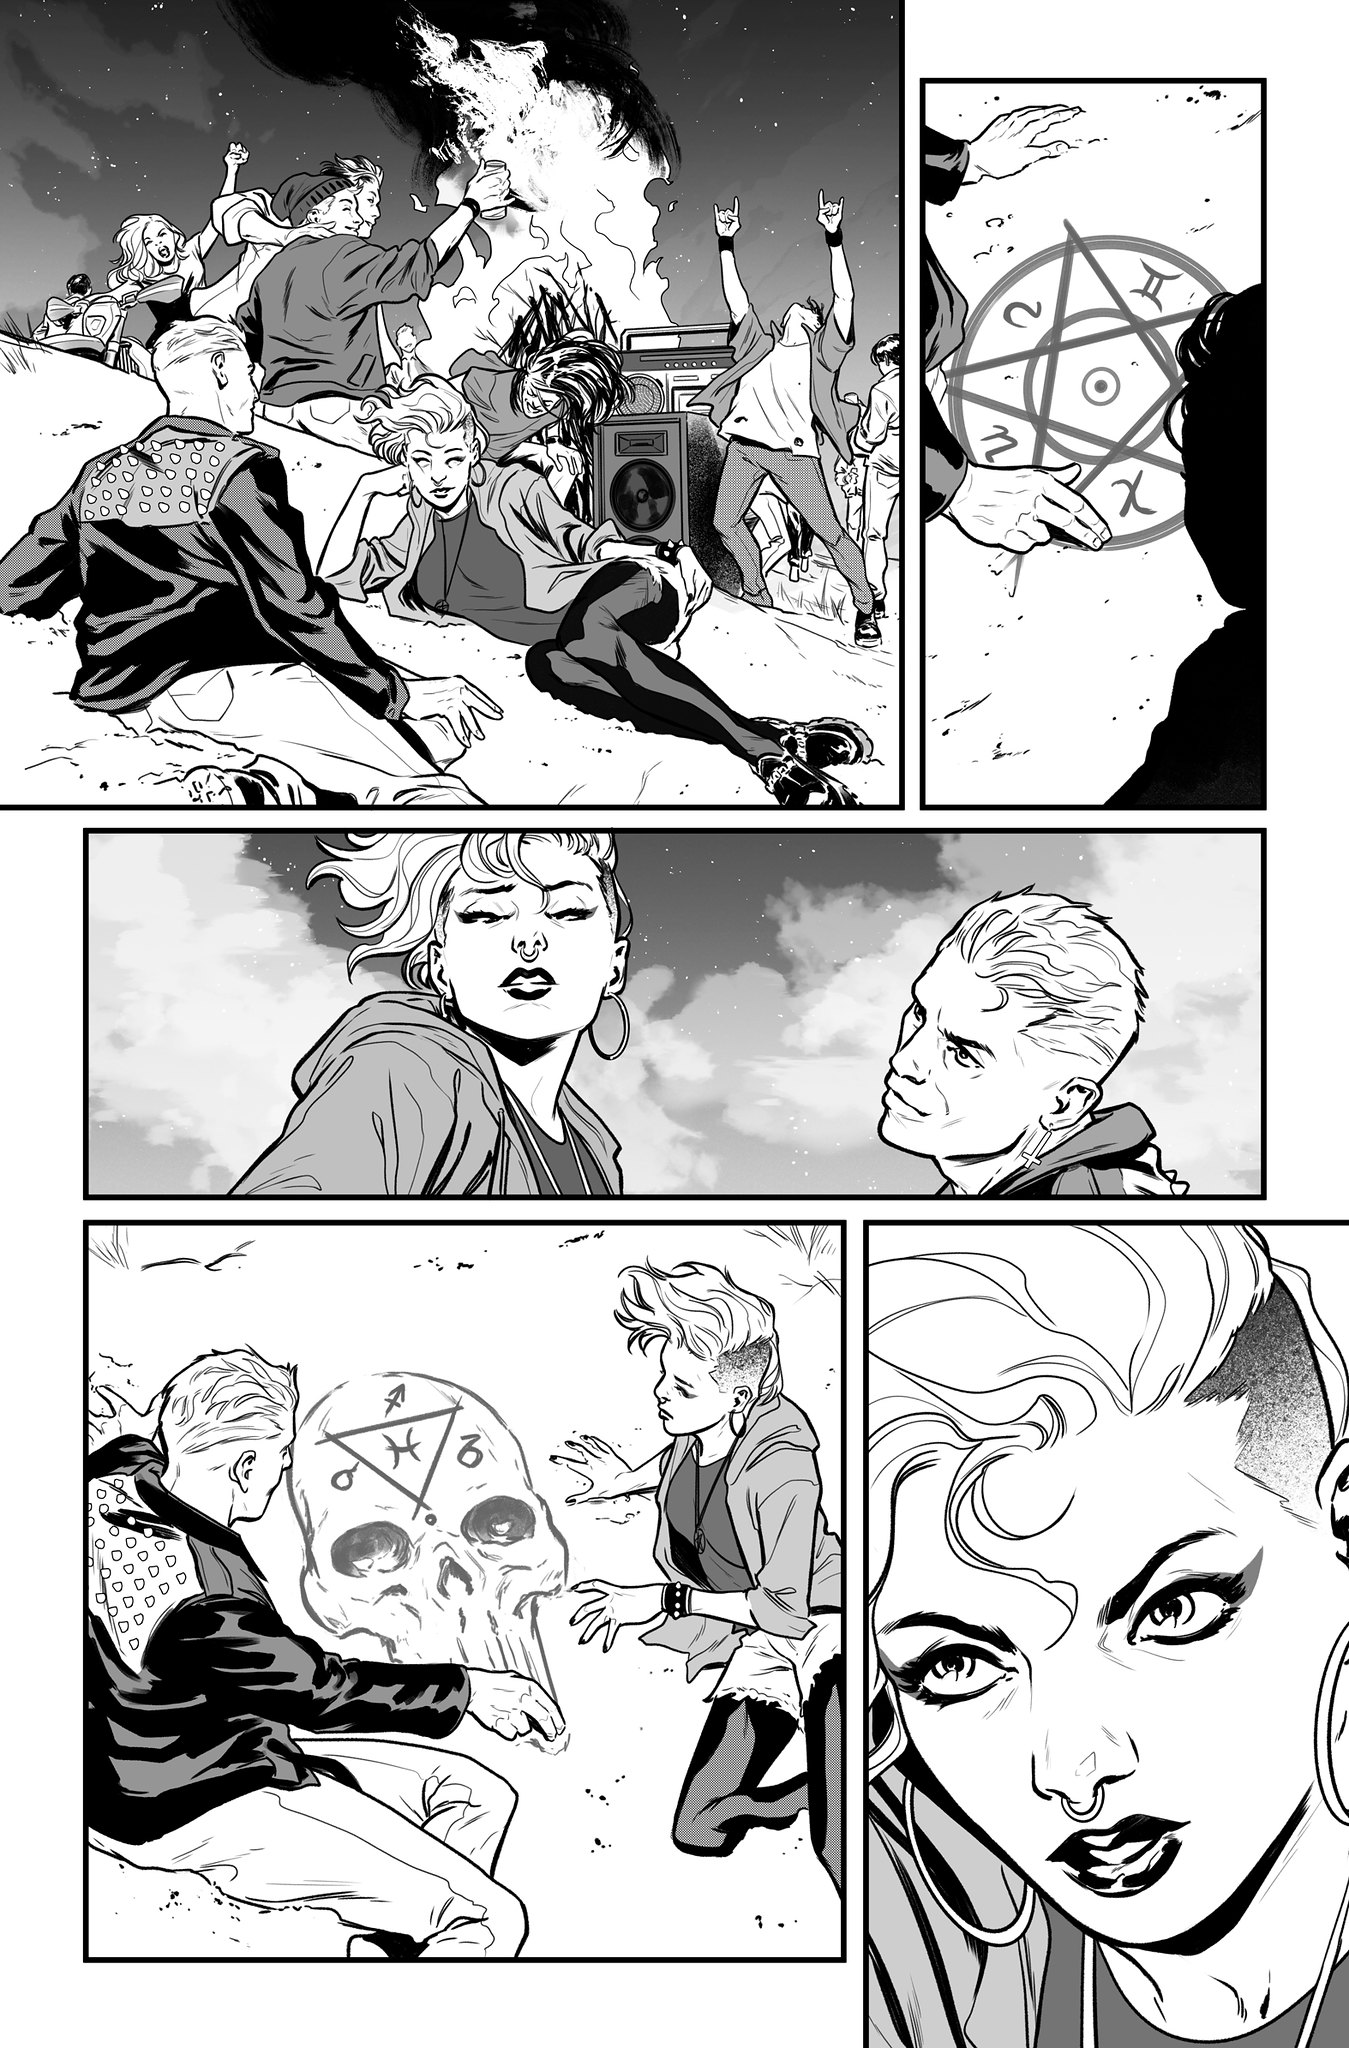 GHOSTRIDER#20_PAGE7_INKS